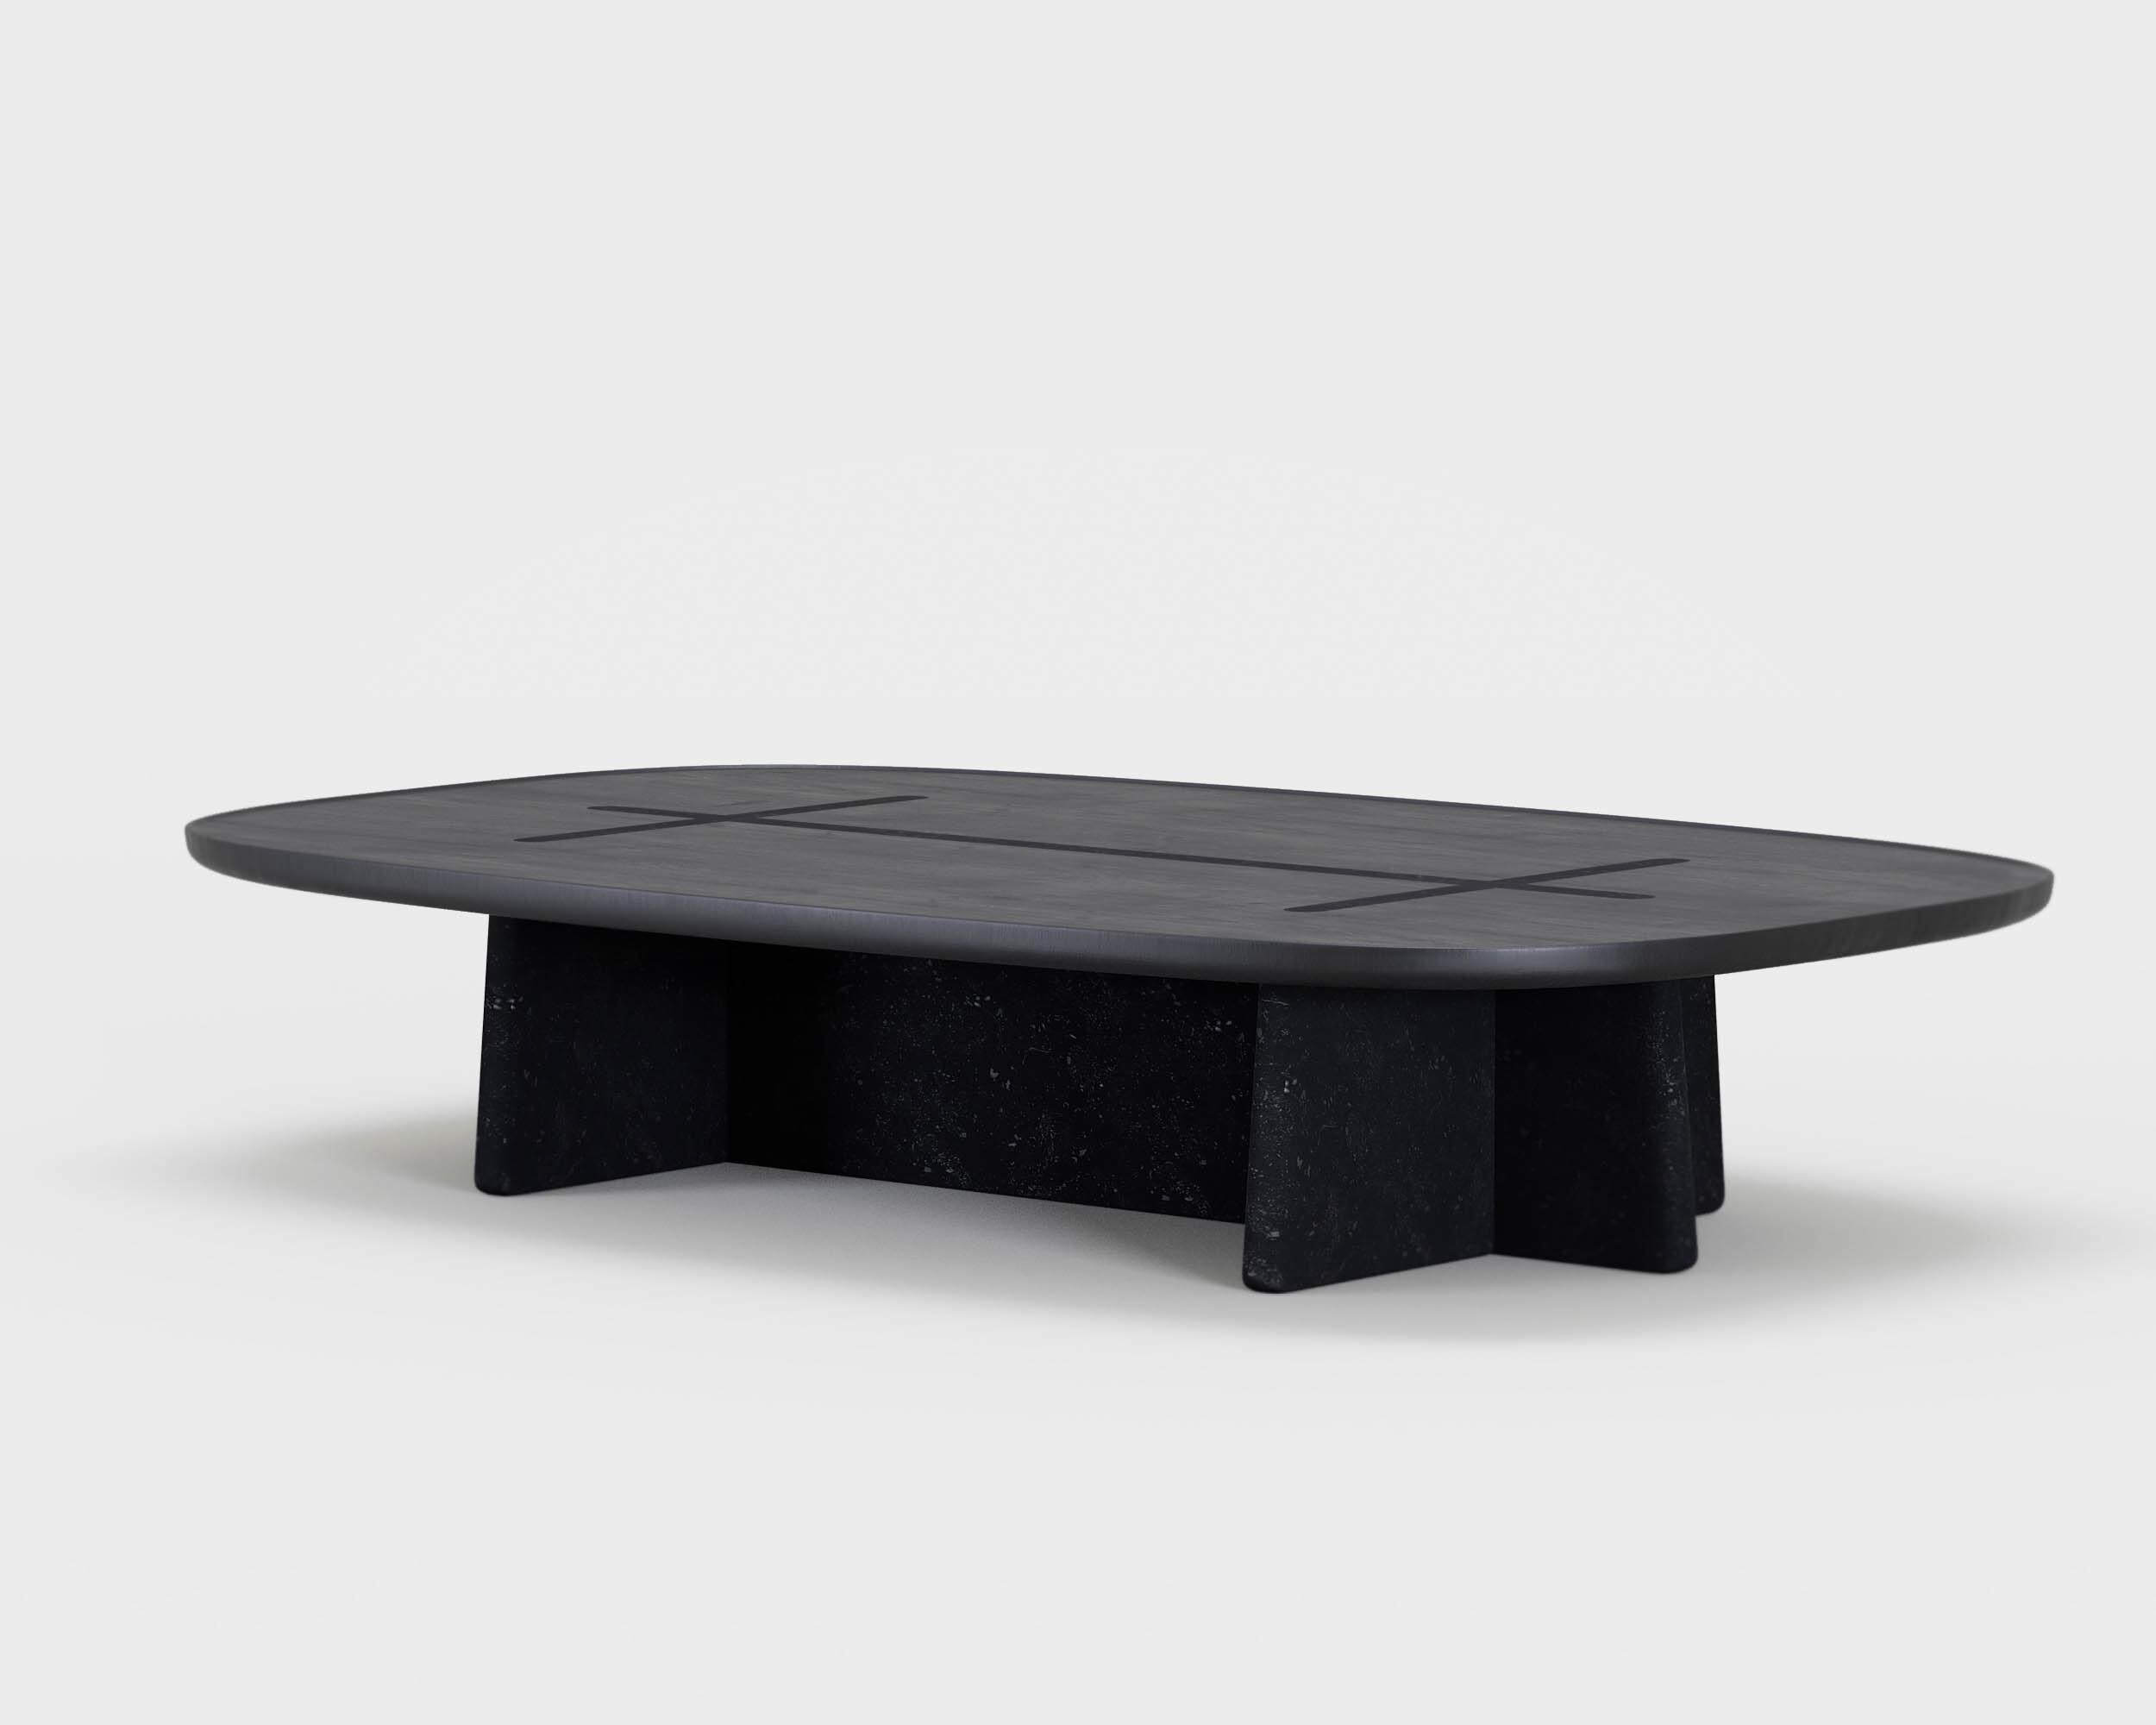 'Bleecker Street' Coffee Table by Man of Parts
Signed by Sebastian Herkner 

Solid oak wood table top available in shades: 
- Black 
- Mist
- Ivory
- Nude 
- Whiskey

Stone base available in shades: 
- French sandstone
- Belgian blue limestone